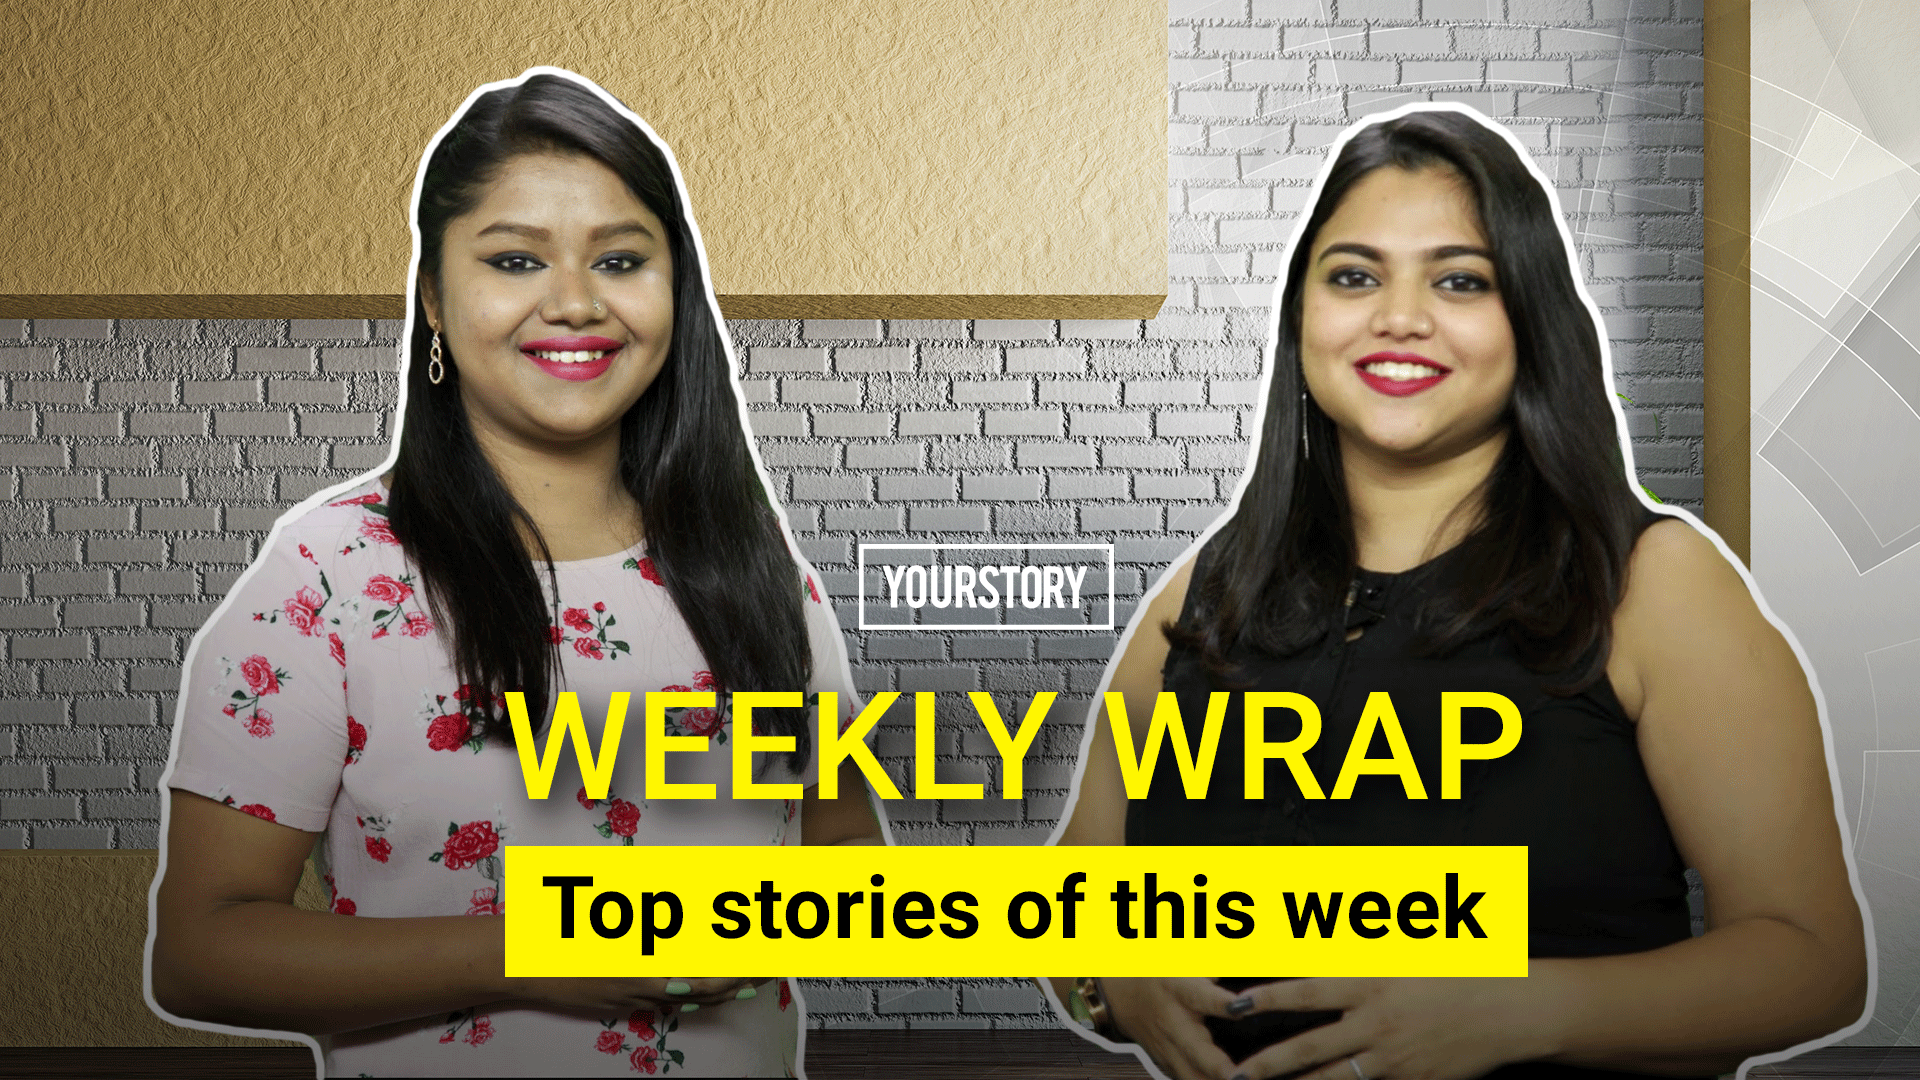 WATCH: The week that was - from investors' thoughts to the rise of Hotstar in India